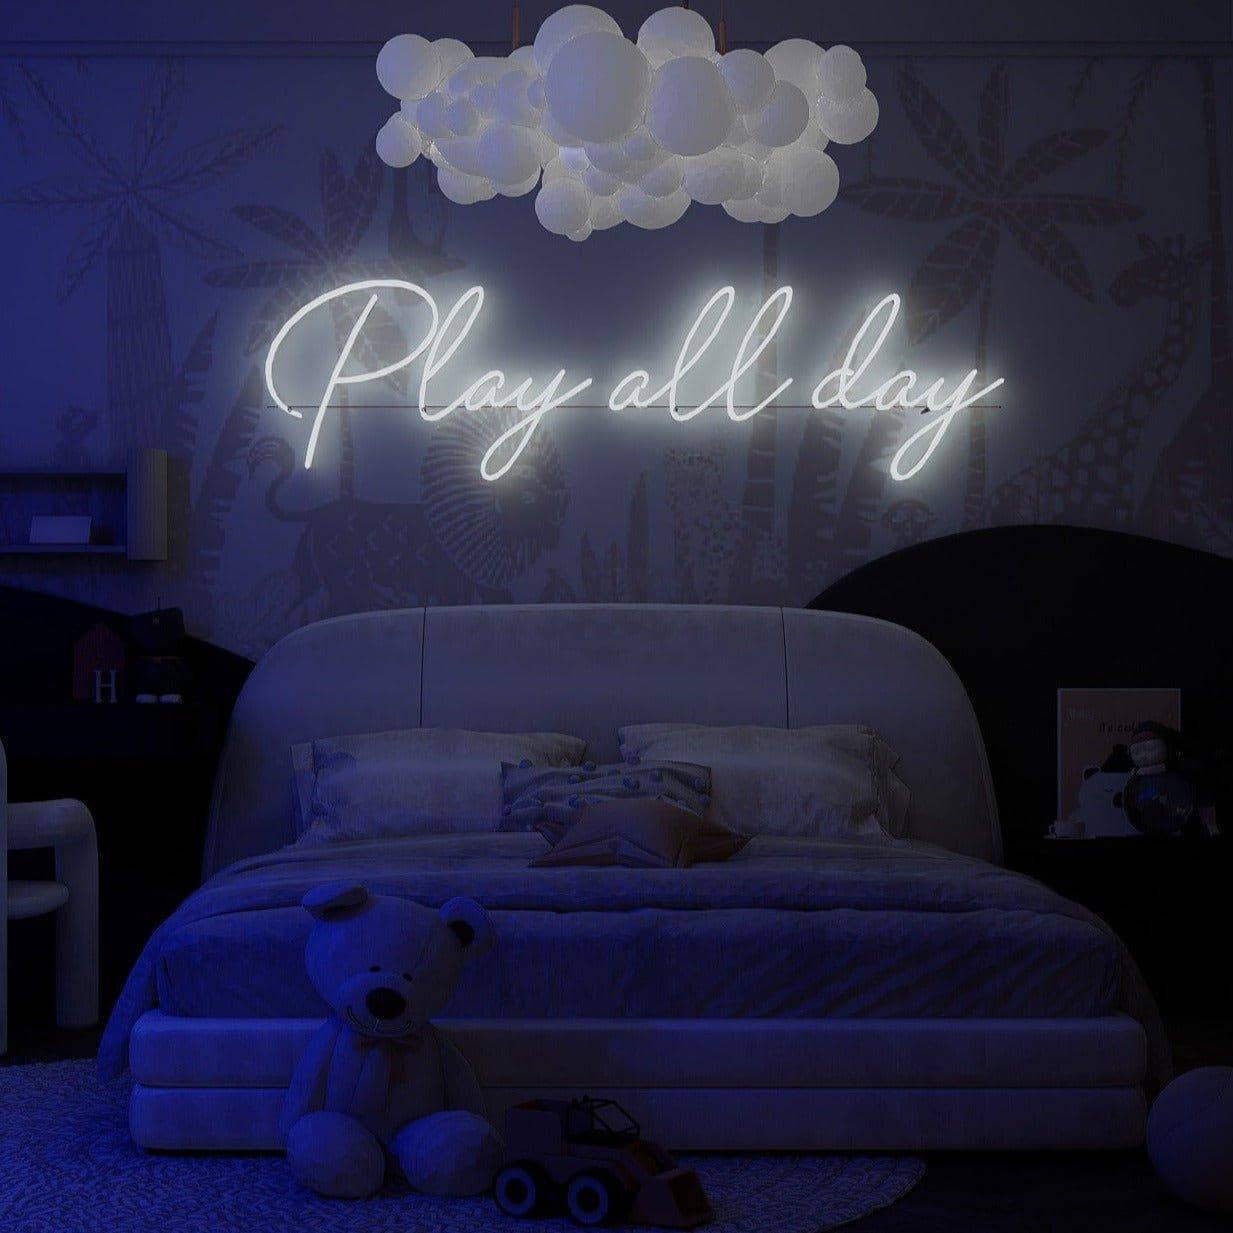 light-up-white-neon-lights-hanging-in-bedroom-display-at-night-play-all-day